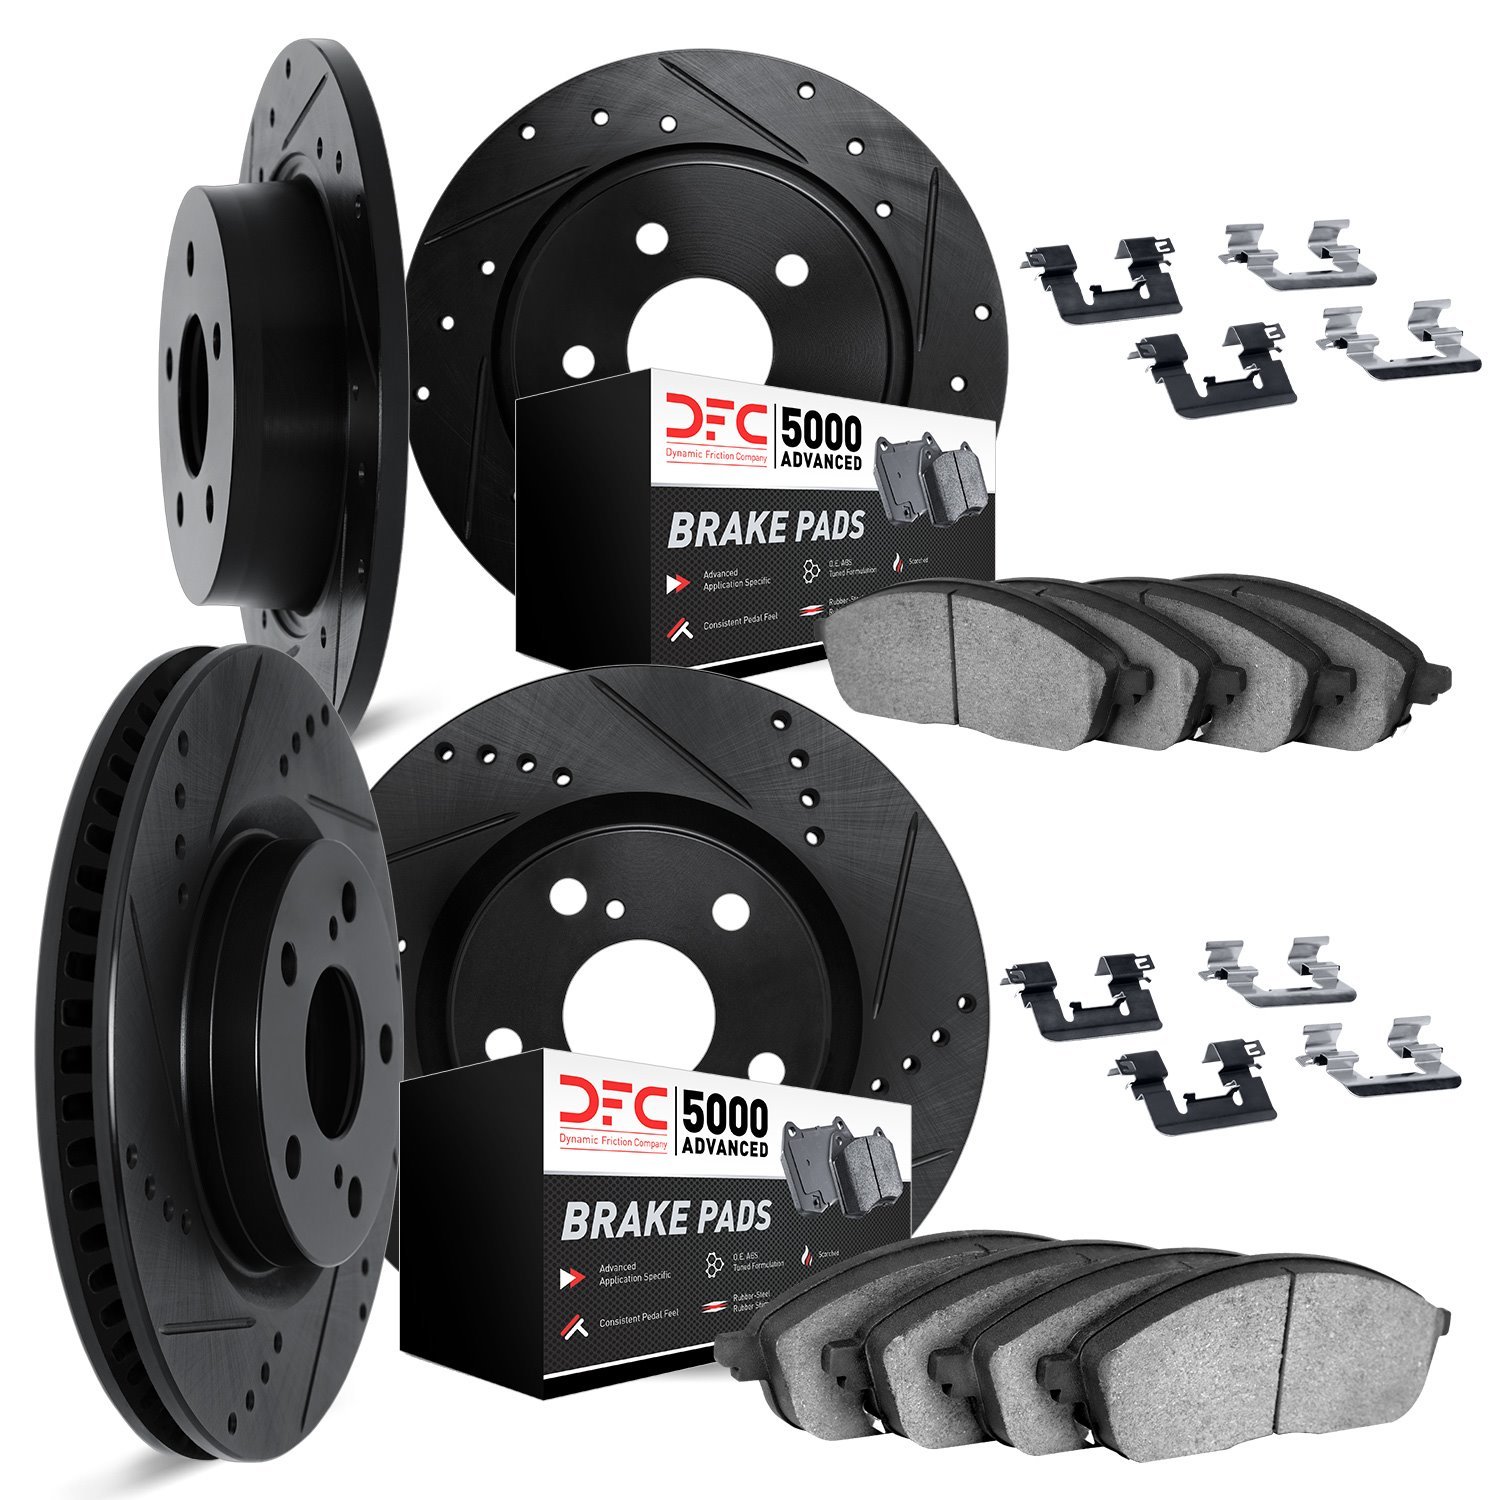 8514-47290 Drilled/Slotted Brake Rotors w/5000 Advanced Brake Pads Kit & Hardware [Black], Fits Select GM, Position: Front and R